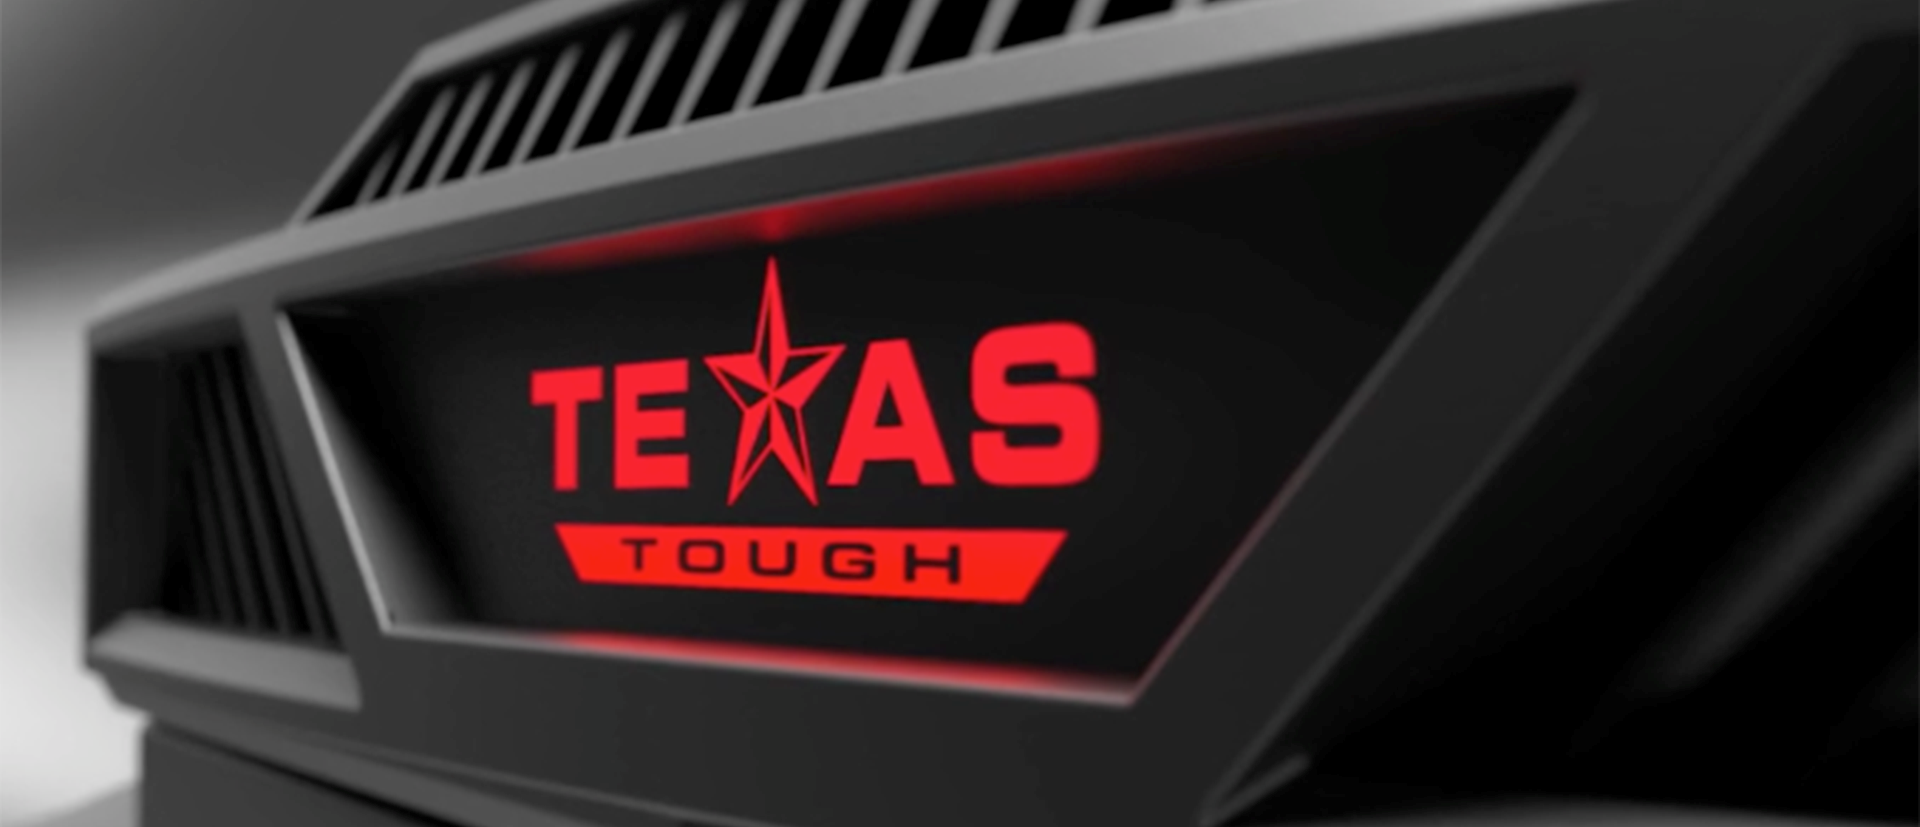 New Texas Tough Equipment Racks Include Features Never Before